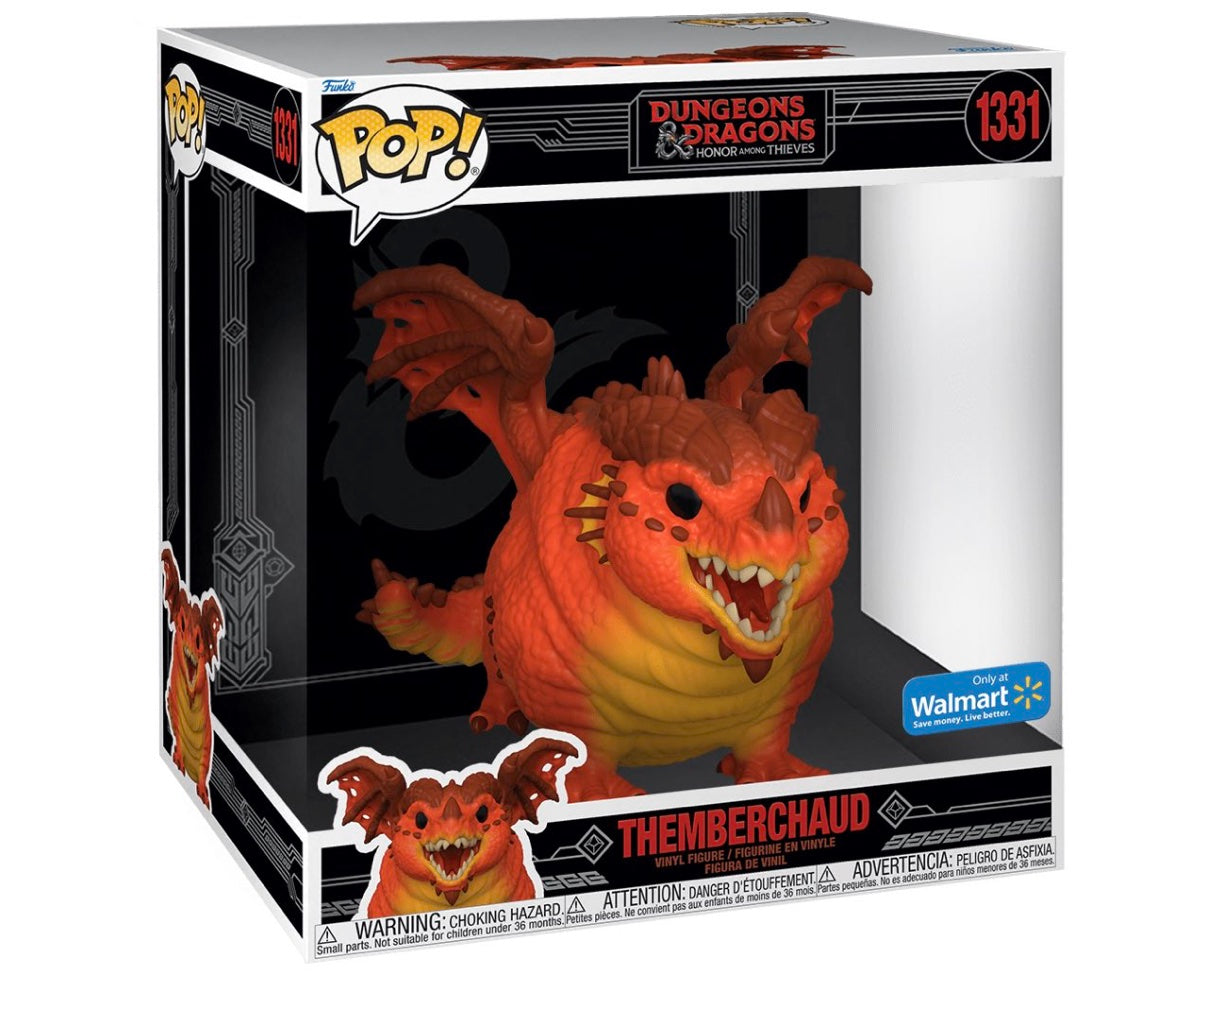 Games: Dungeons & Dragons: 10" Themberchaud (Walmart Exclusive)